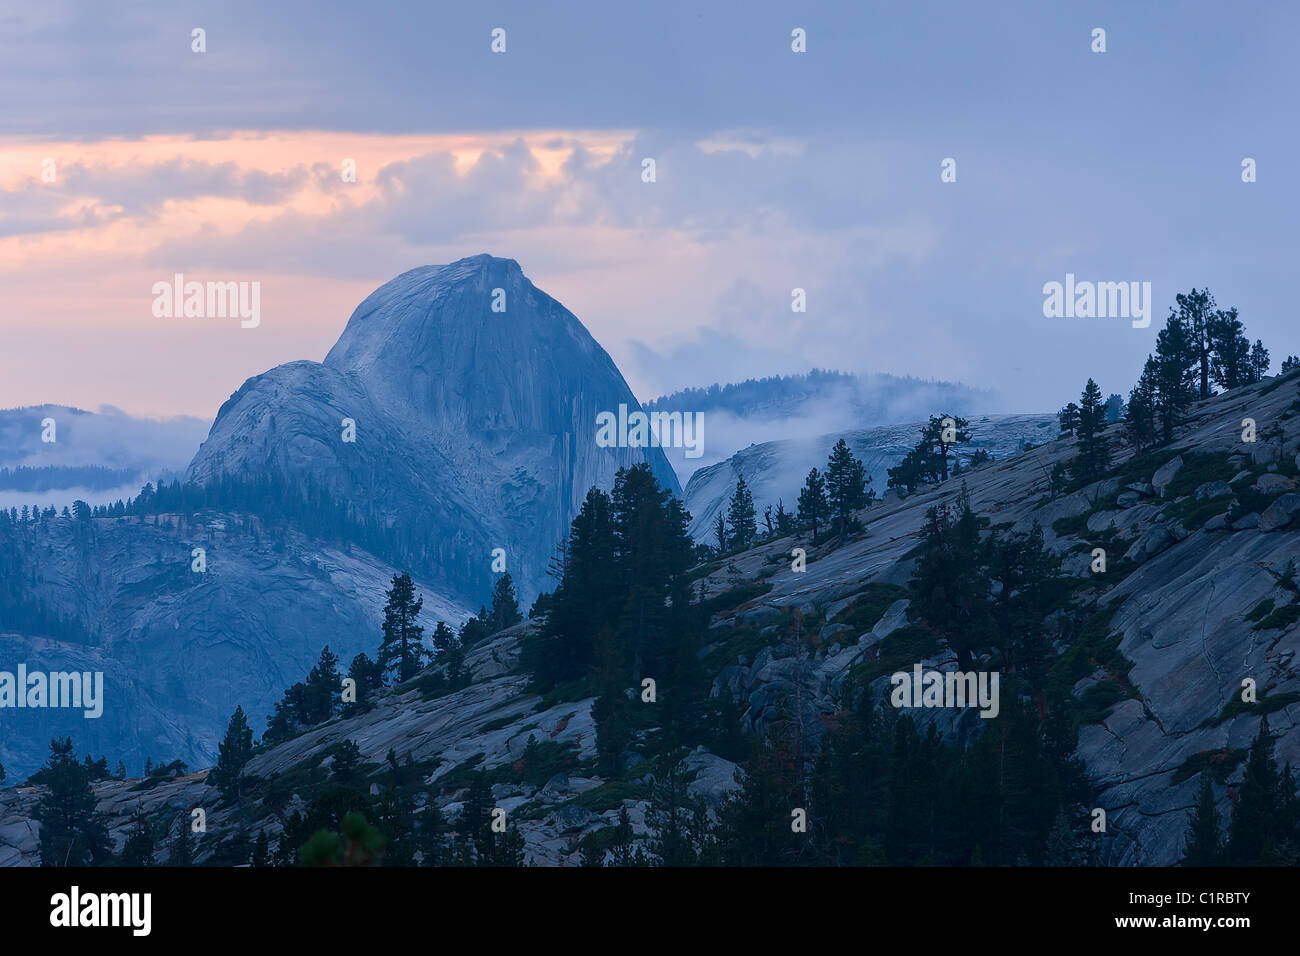 Hal Dome at dusk as seen from Olmstead Point, Yosemite National Park, California, USA. Stock Photo